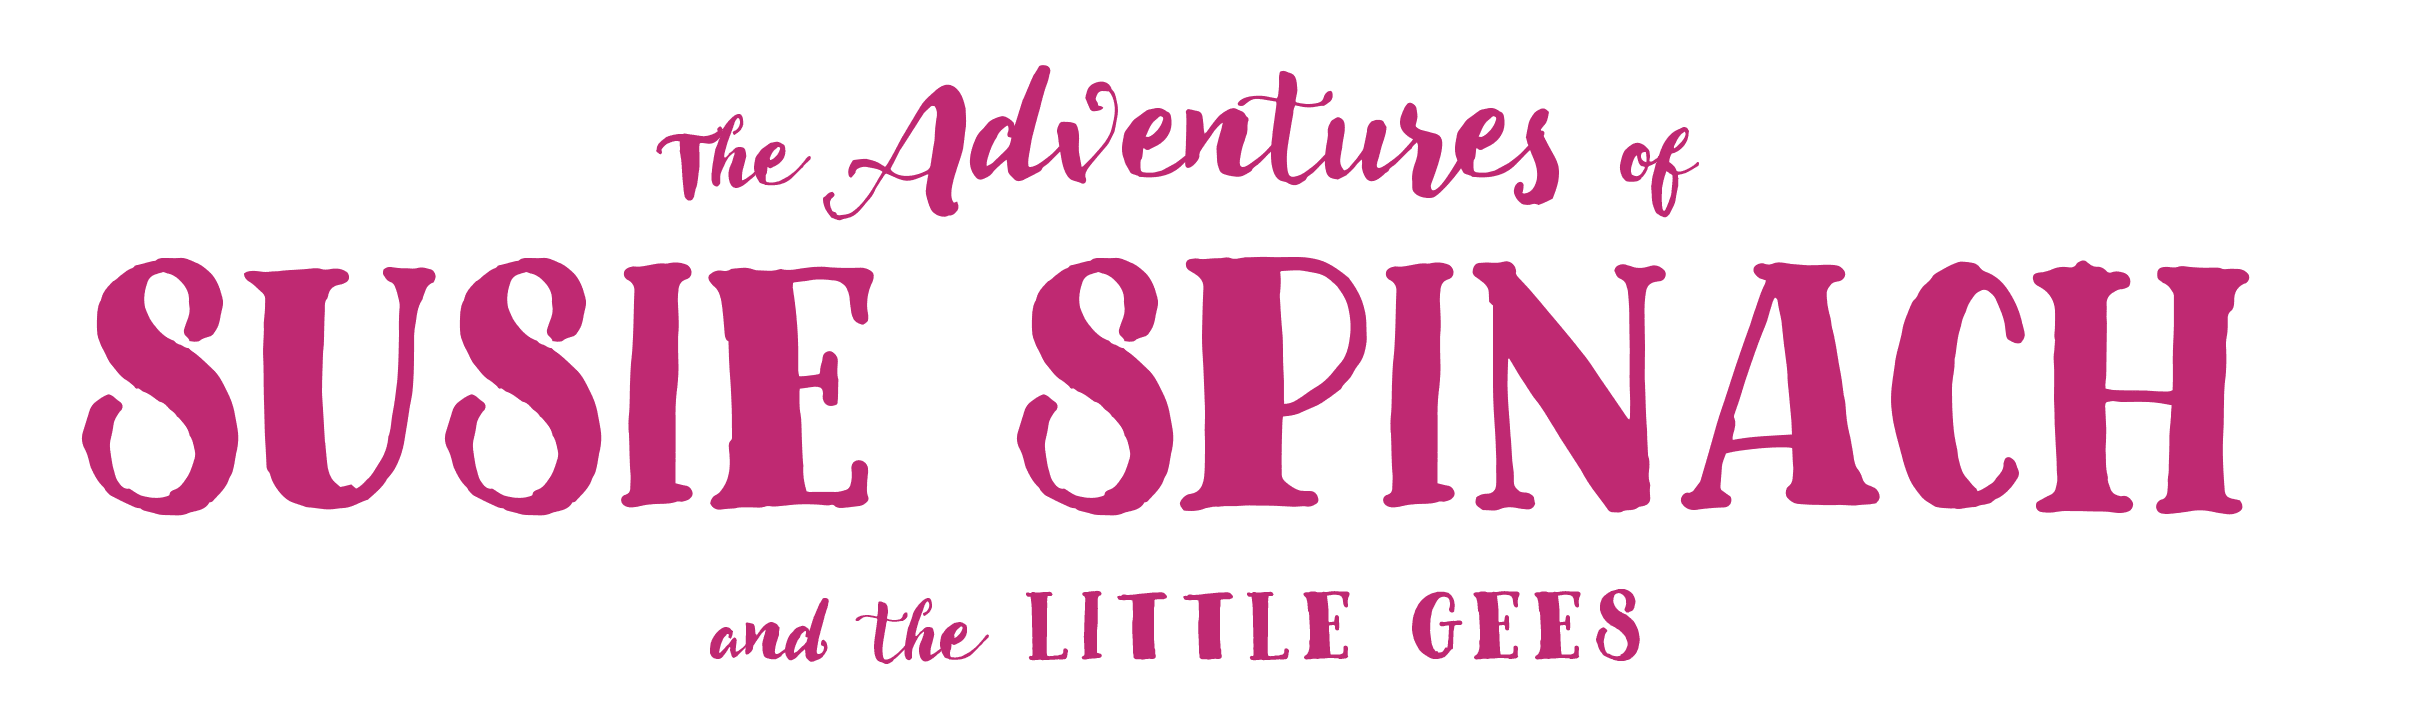 A green banner with pink lettering that says " adventures of the spinster and the little girl ".